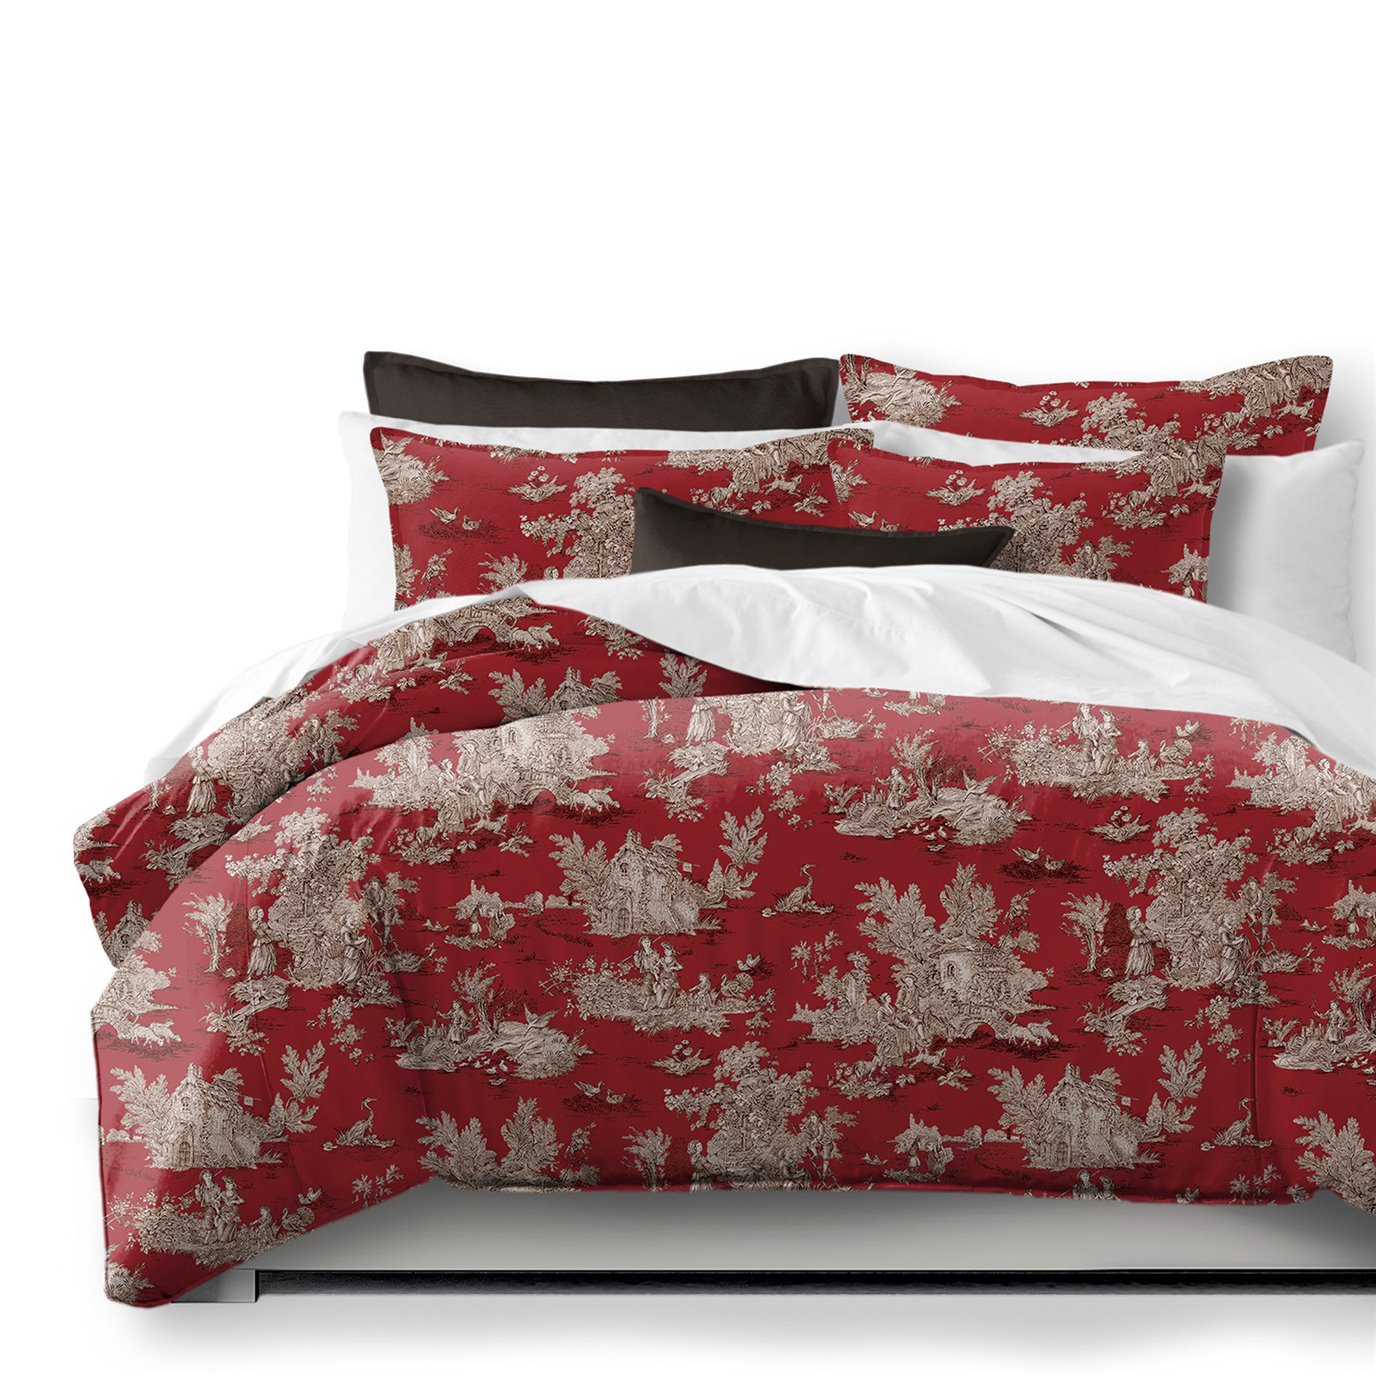 Chateau Red/Black Duvet Cover and Pillow Sham(s) Set - Size King / California King